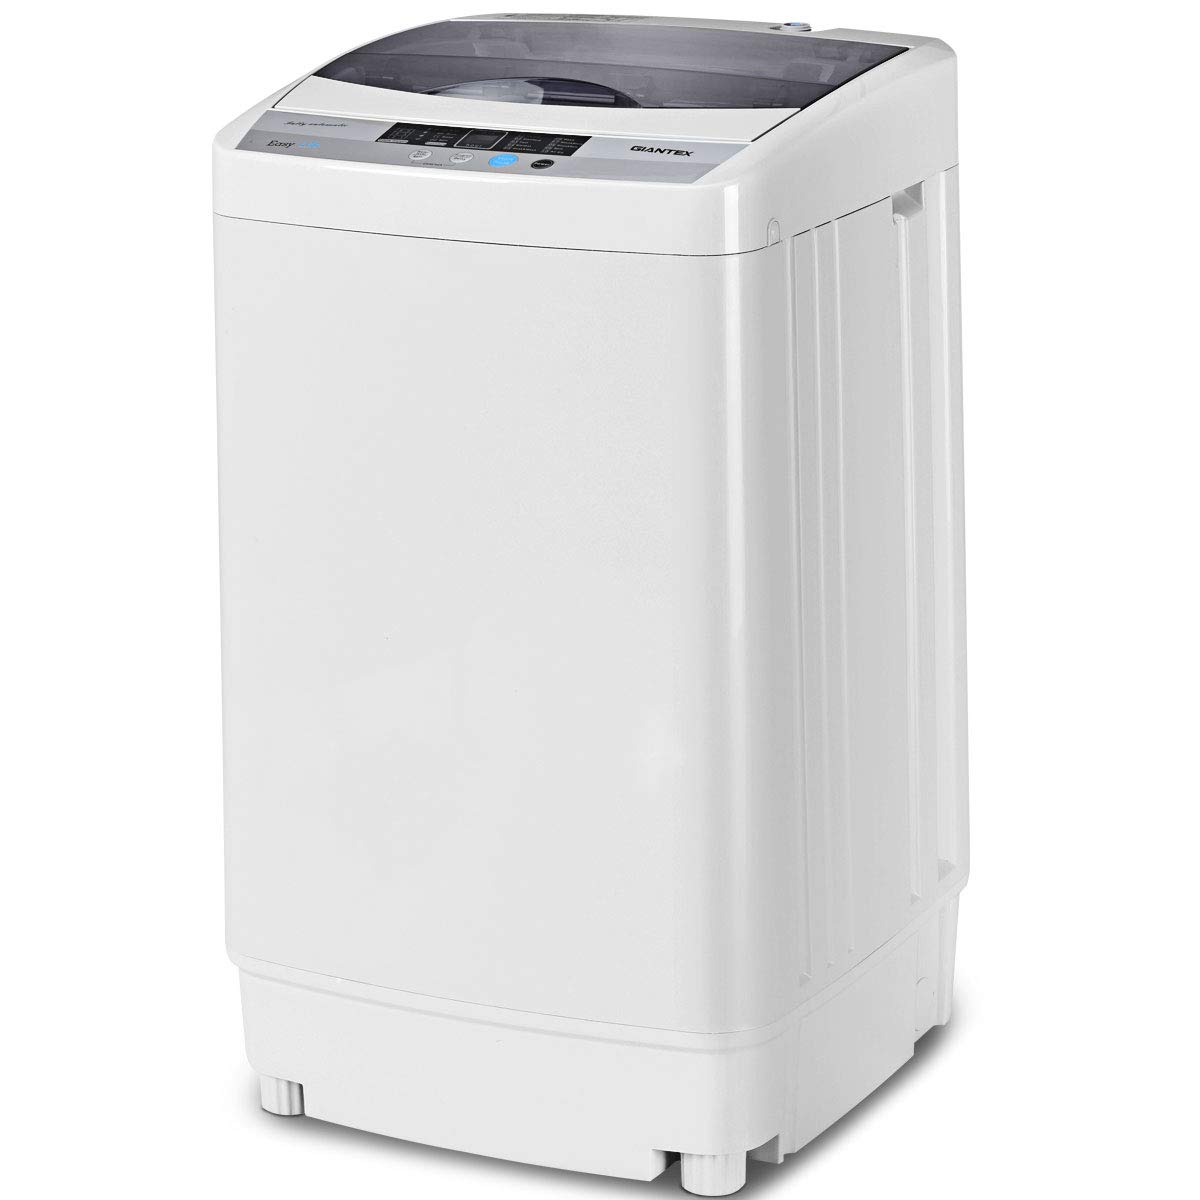 Giantex Full-Automatic Washing Machine Portable Compact 1.6 Cu.ft Laundry Washer Spin with Drain Pump, 10 programs 8 Water Level Selections with LED Display 10 Lbs Capacity